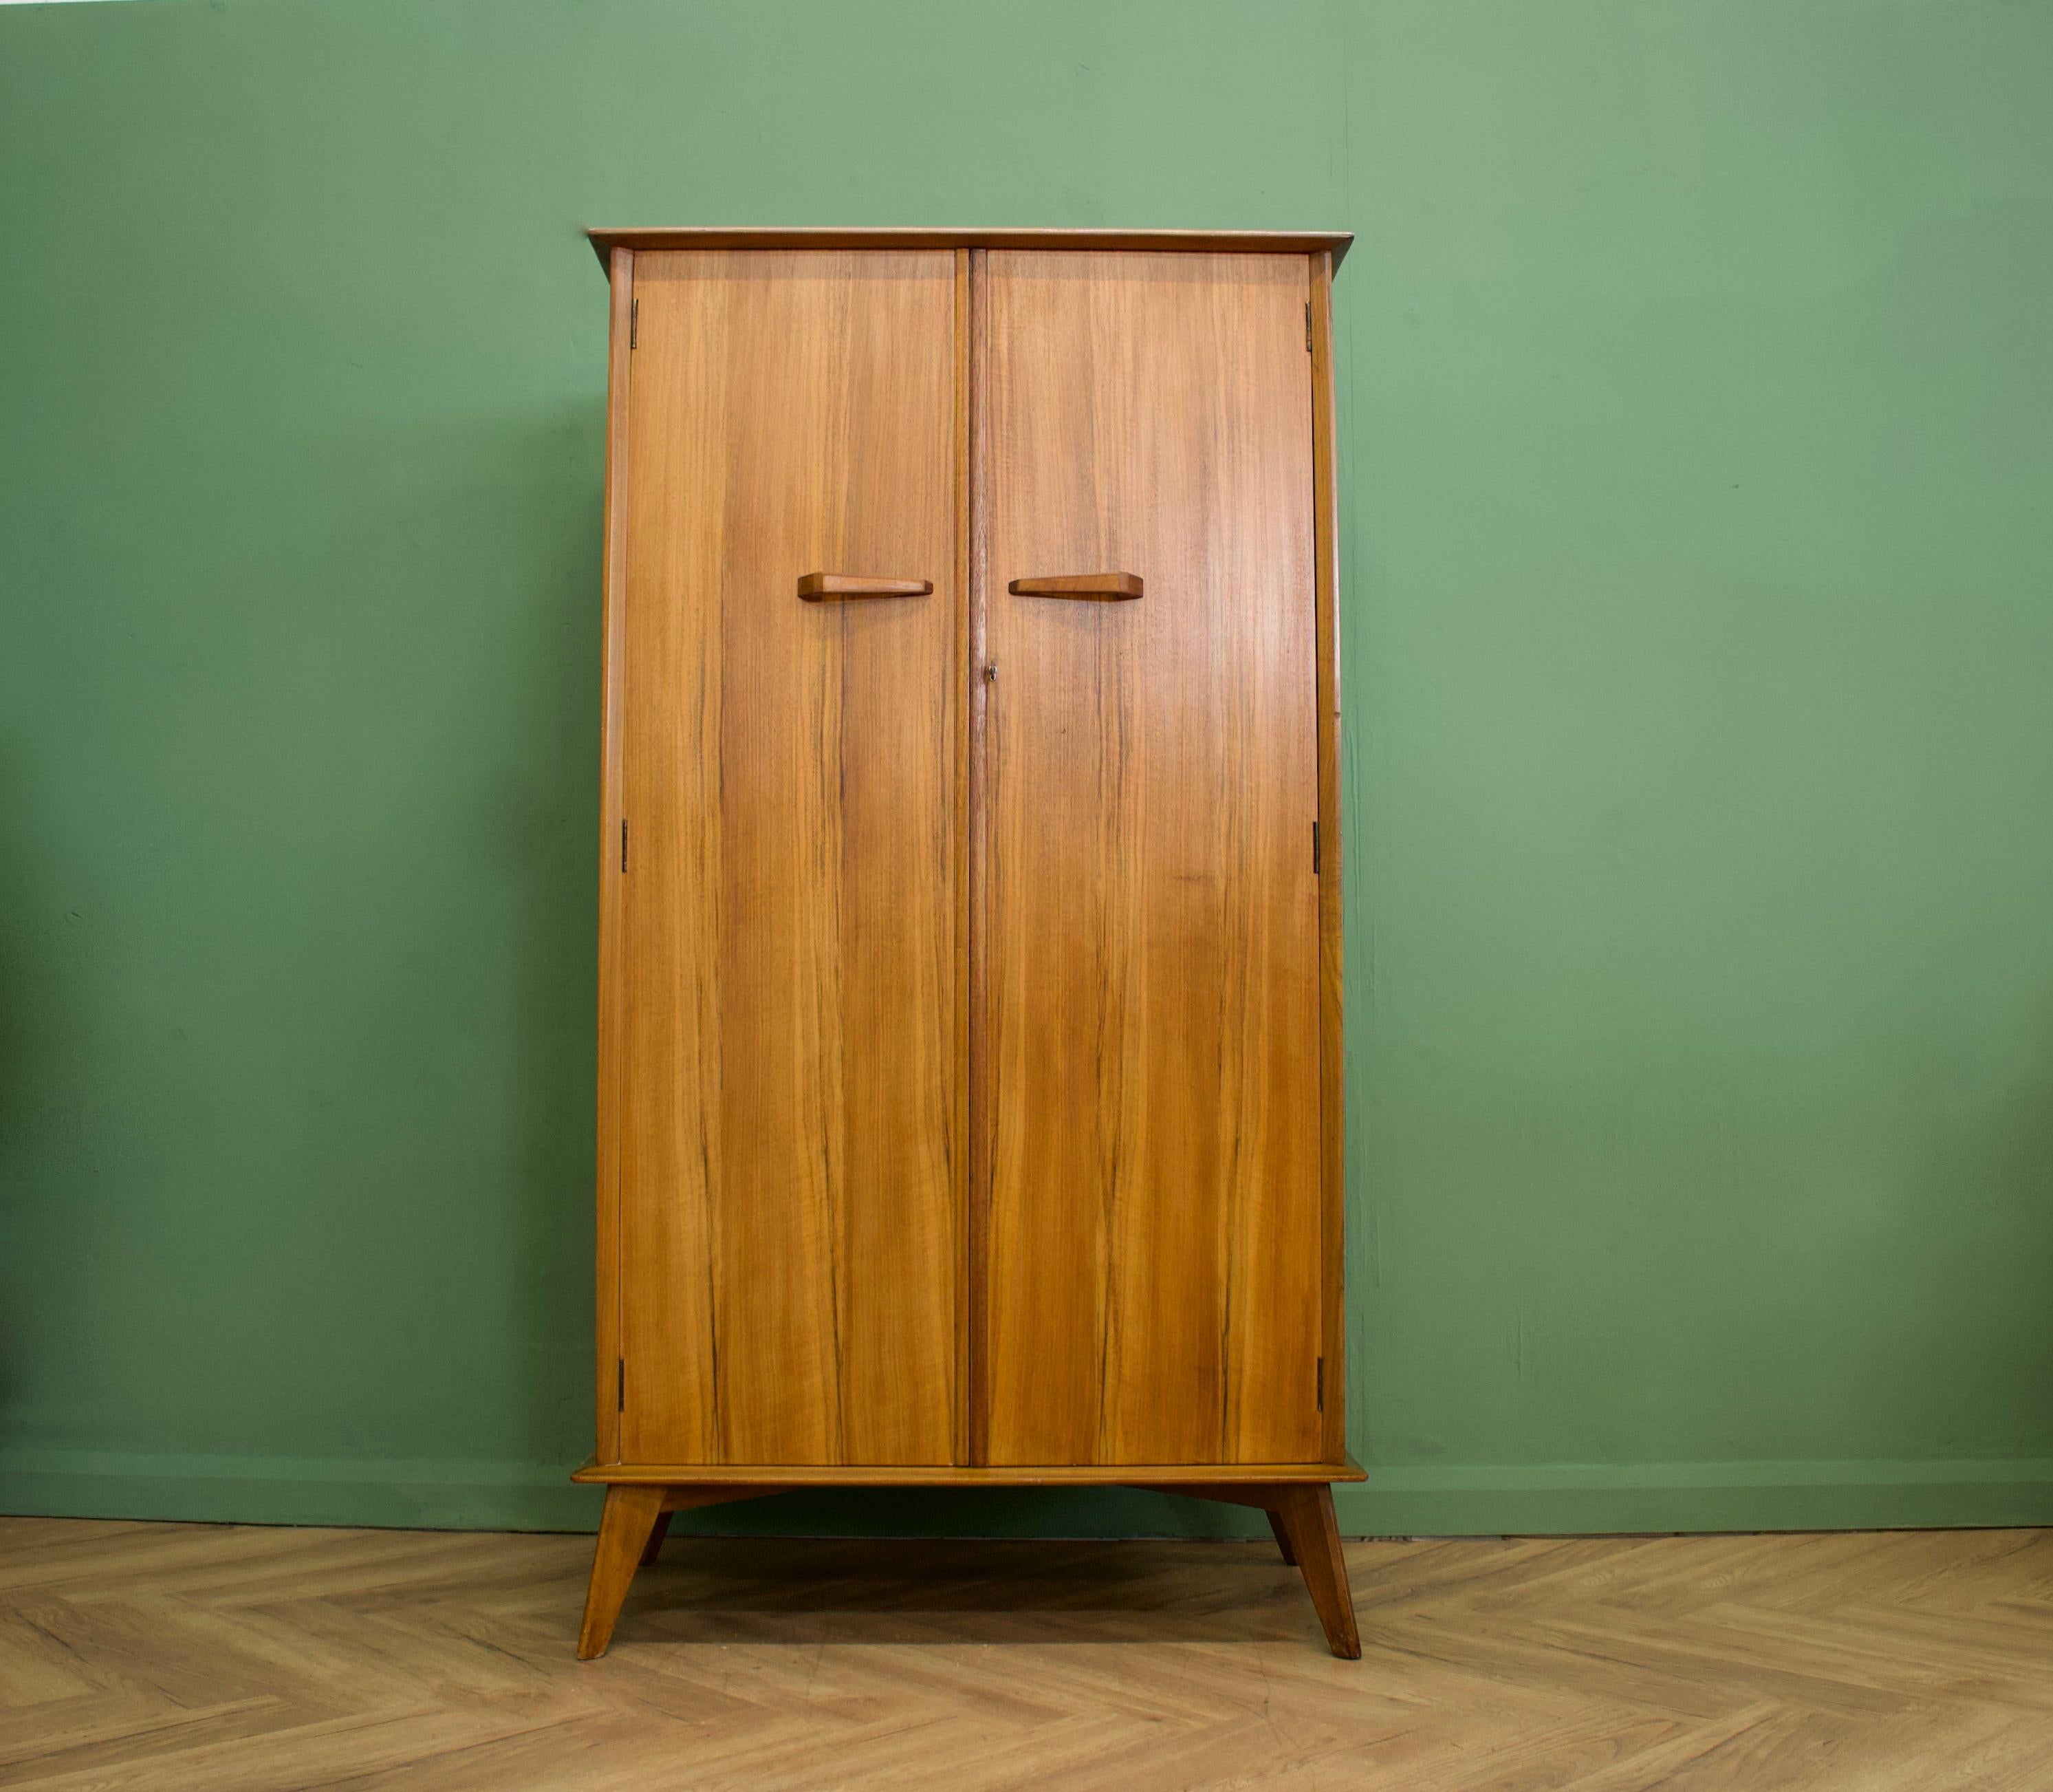 A freestanding teak wardrobe from Crown Furniture.
Featuring a hanging rail the full width.